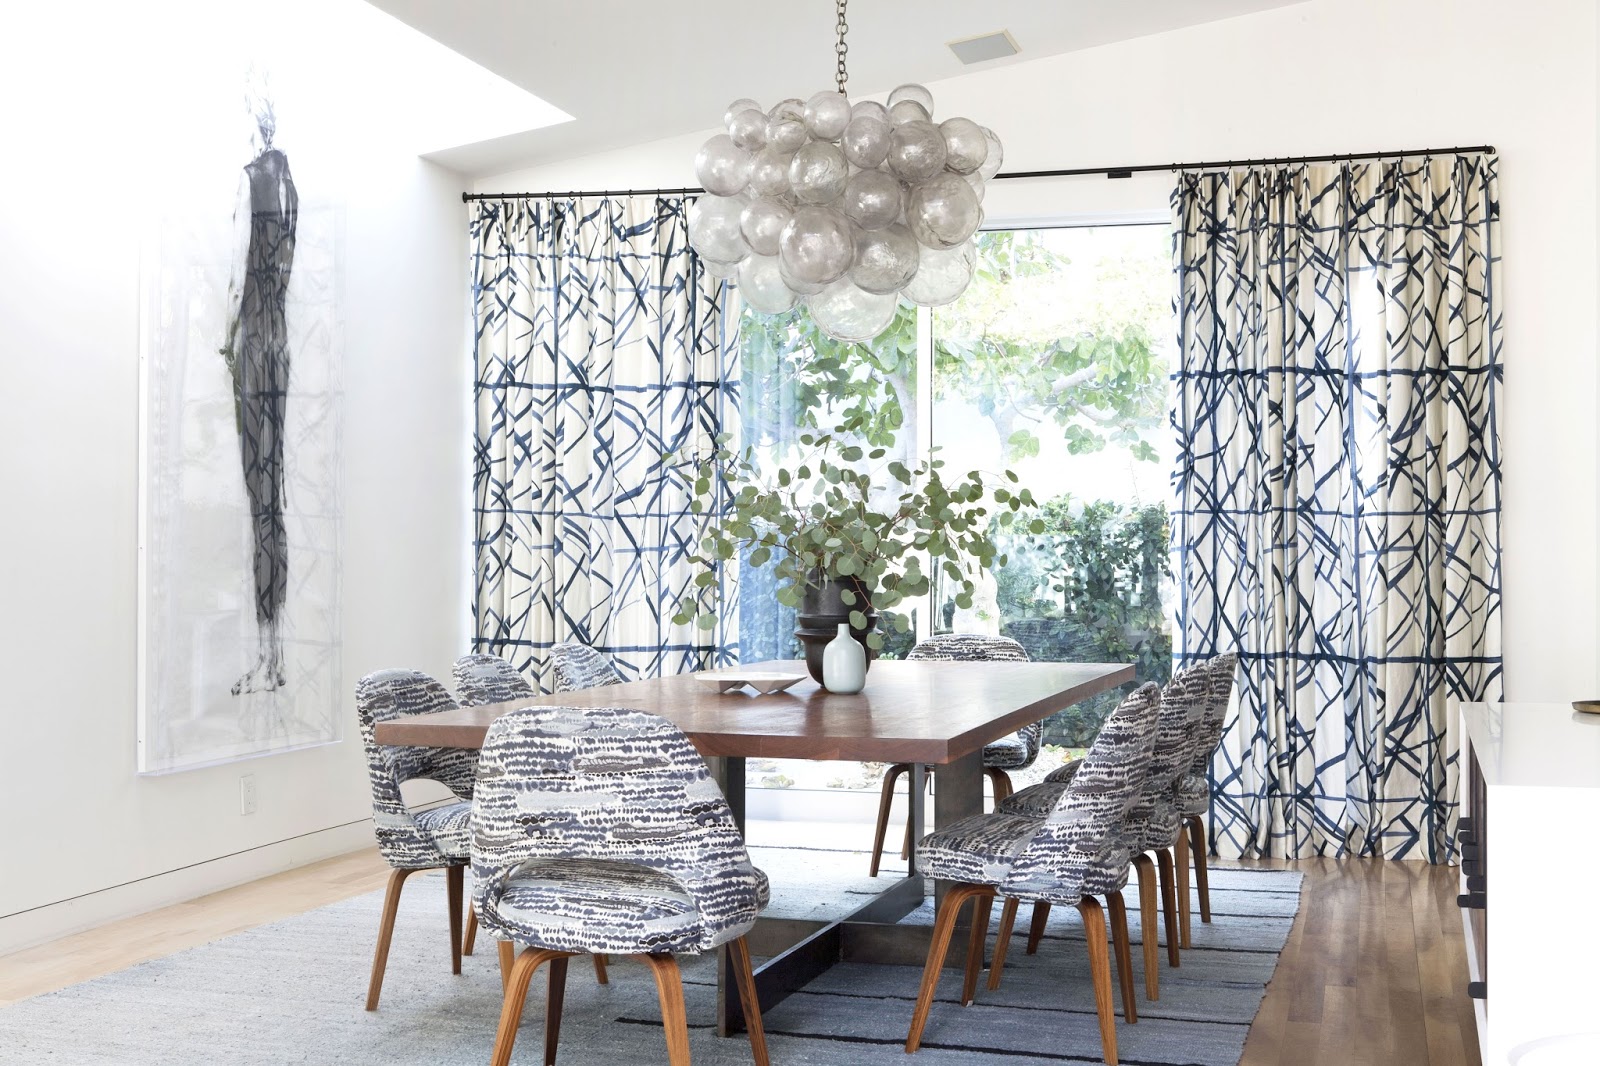 Dining room with bubble chadelier and graphic printed curtains and chairs